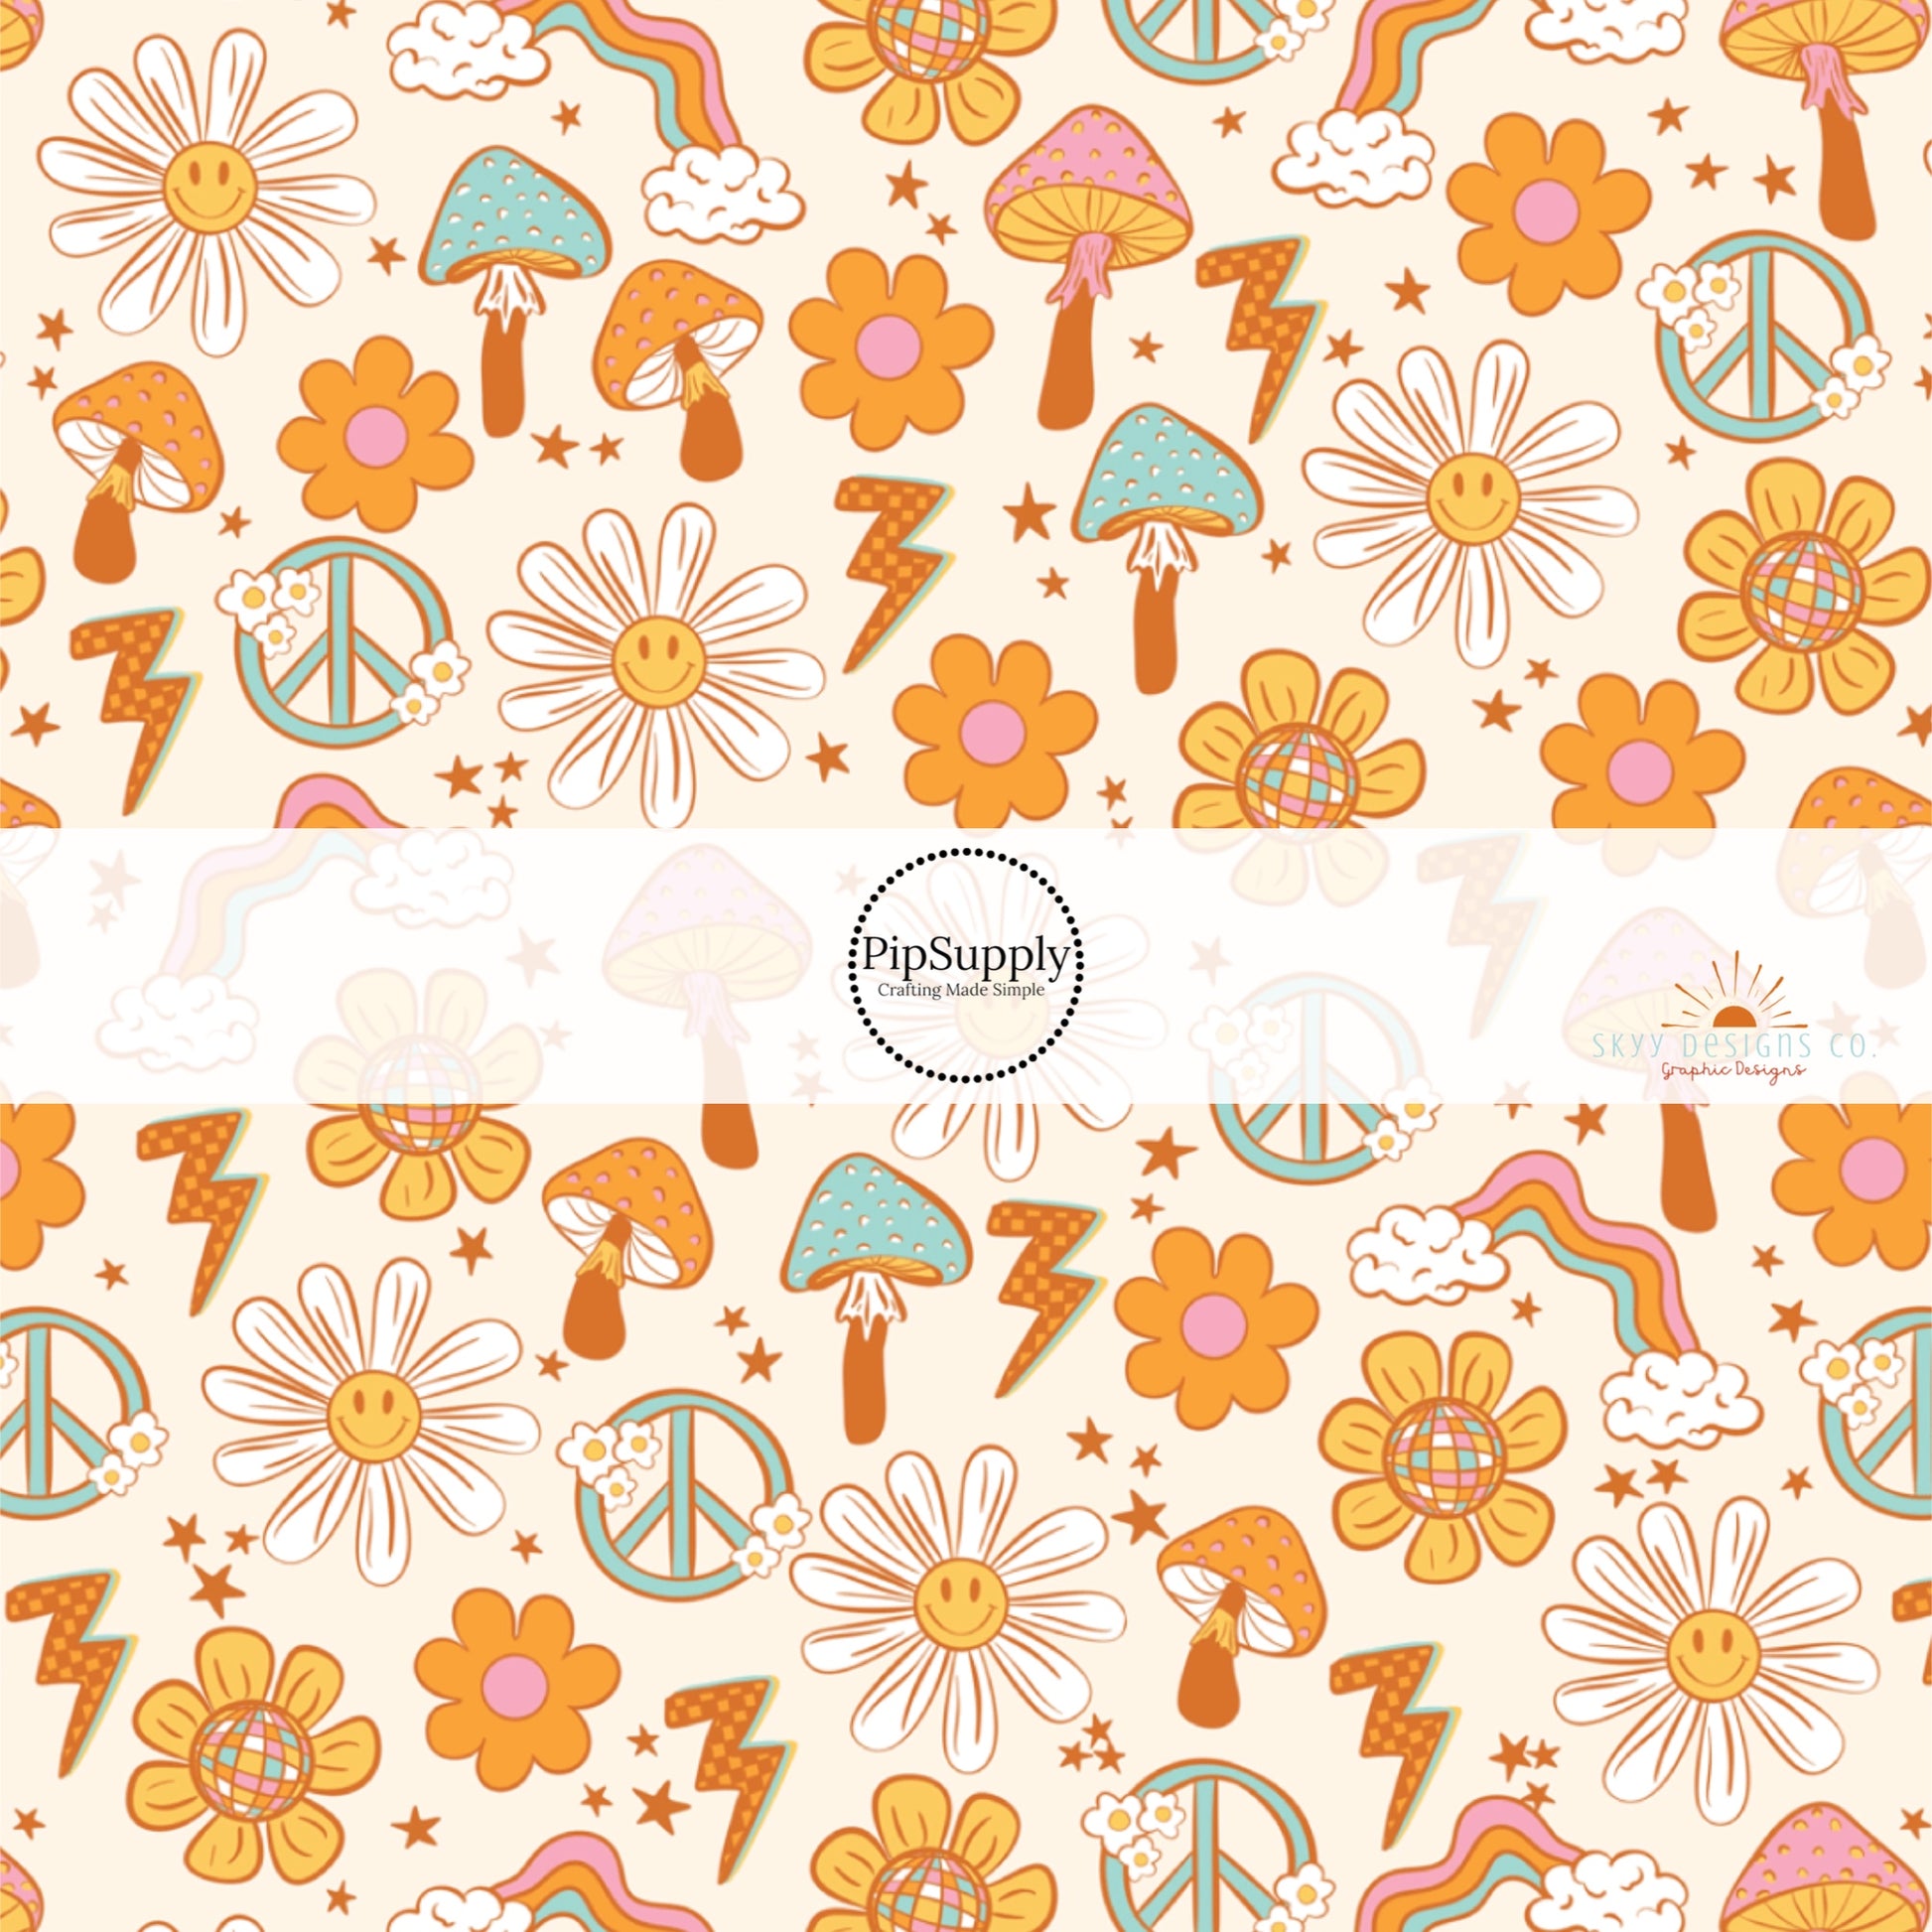 Spring Flowers and Mushrooms Fabric By The Yard - Peace, Love